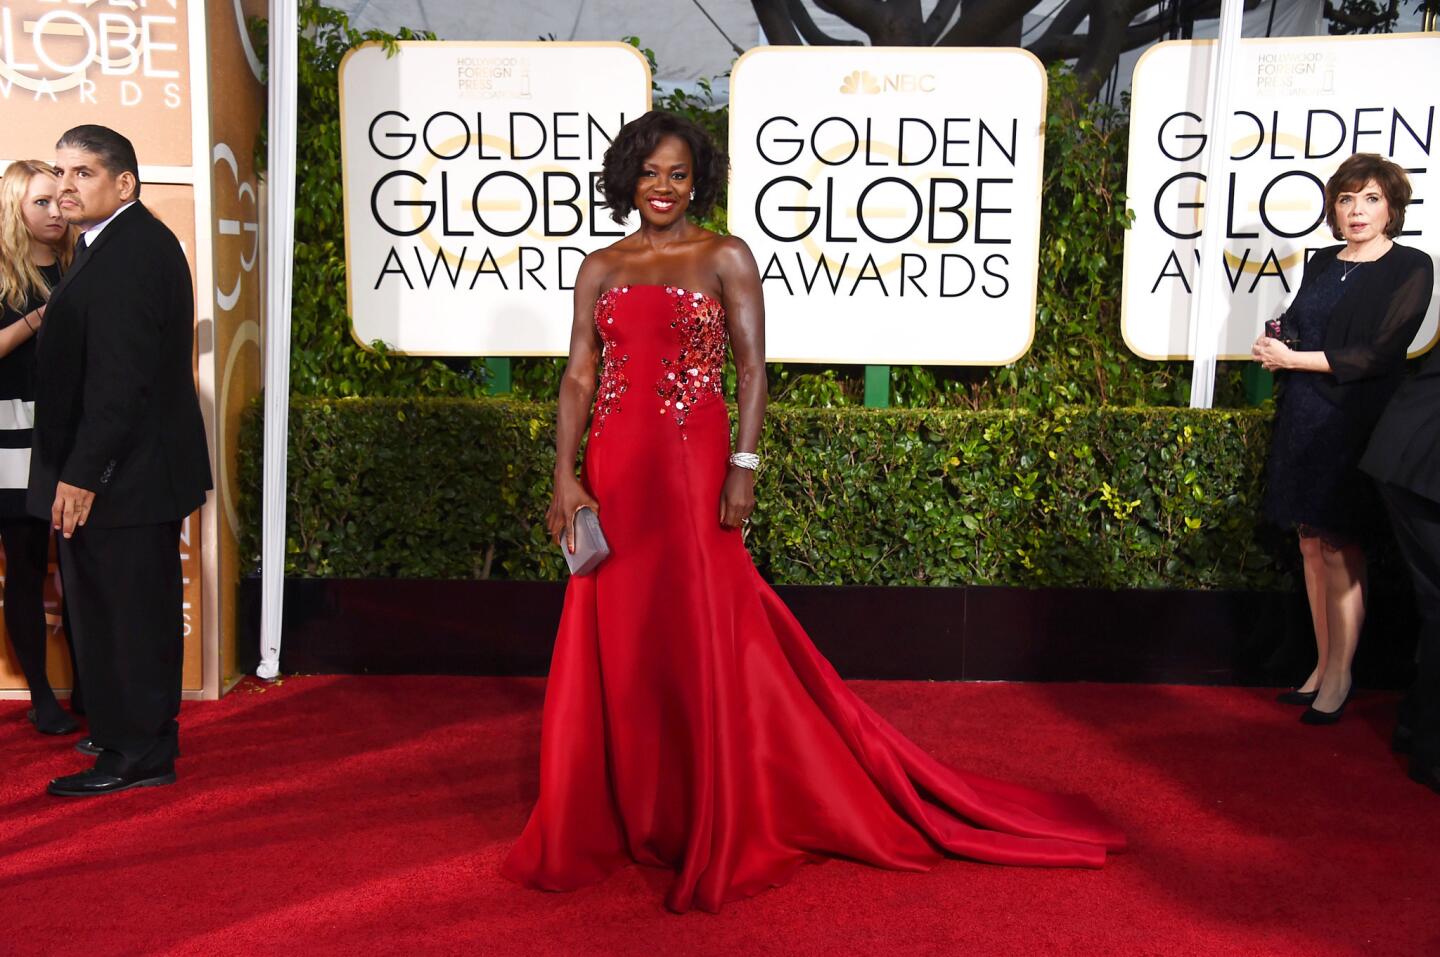 Viola Davis arrives at the 72nd annual Golden Globe Awards at the Beverly Hilton Hotel on Jan. 11, 2015.